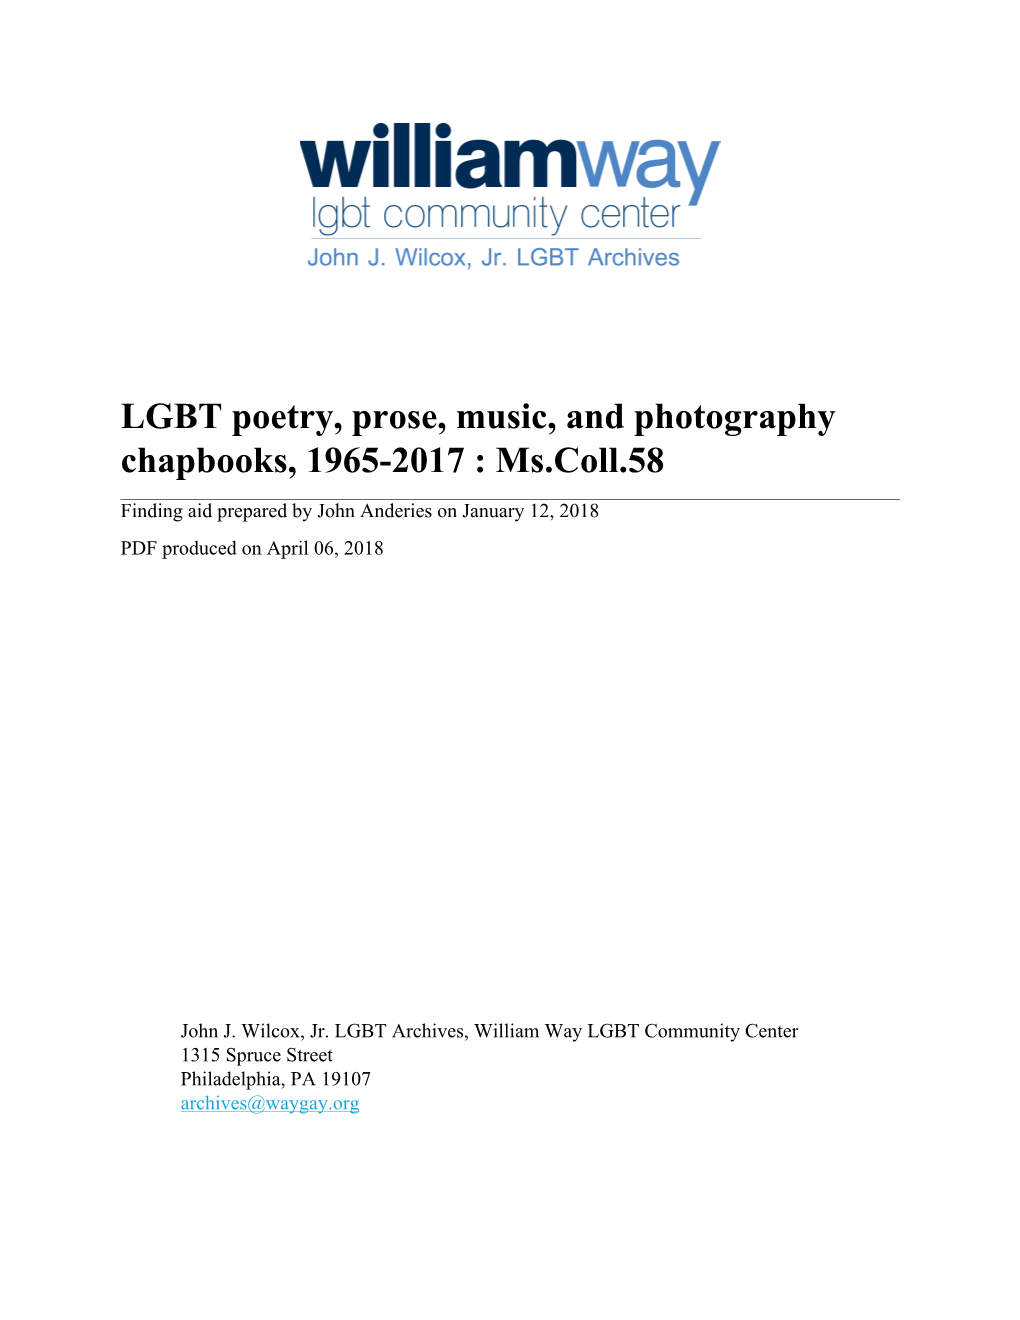 LGBT Poetry, Prose, Music, and Photography Chapbooks, 1965-2017 : Ms.Coll.58